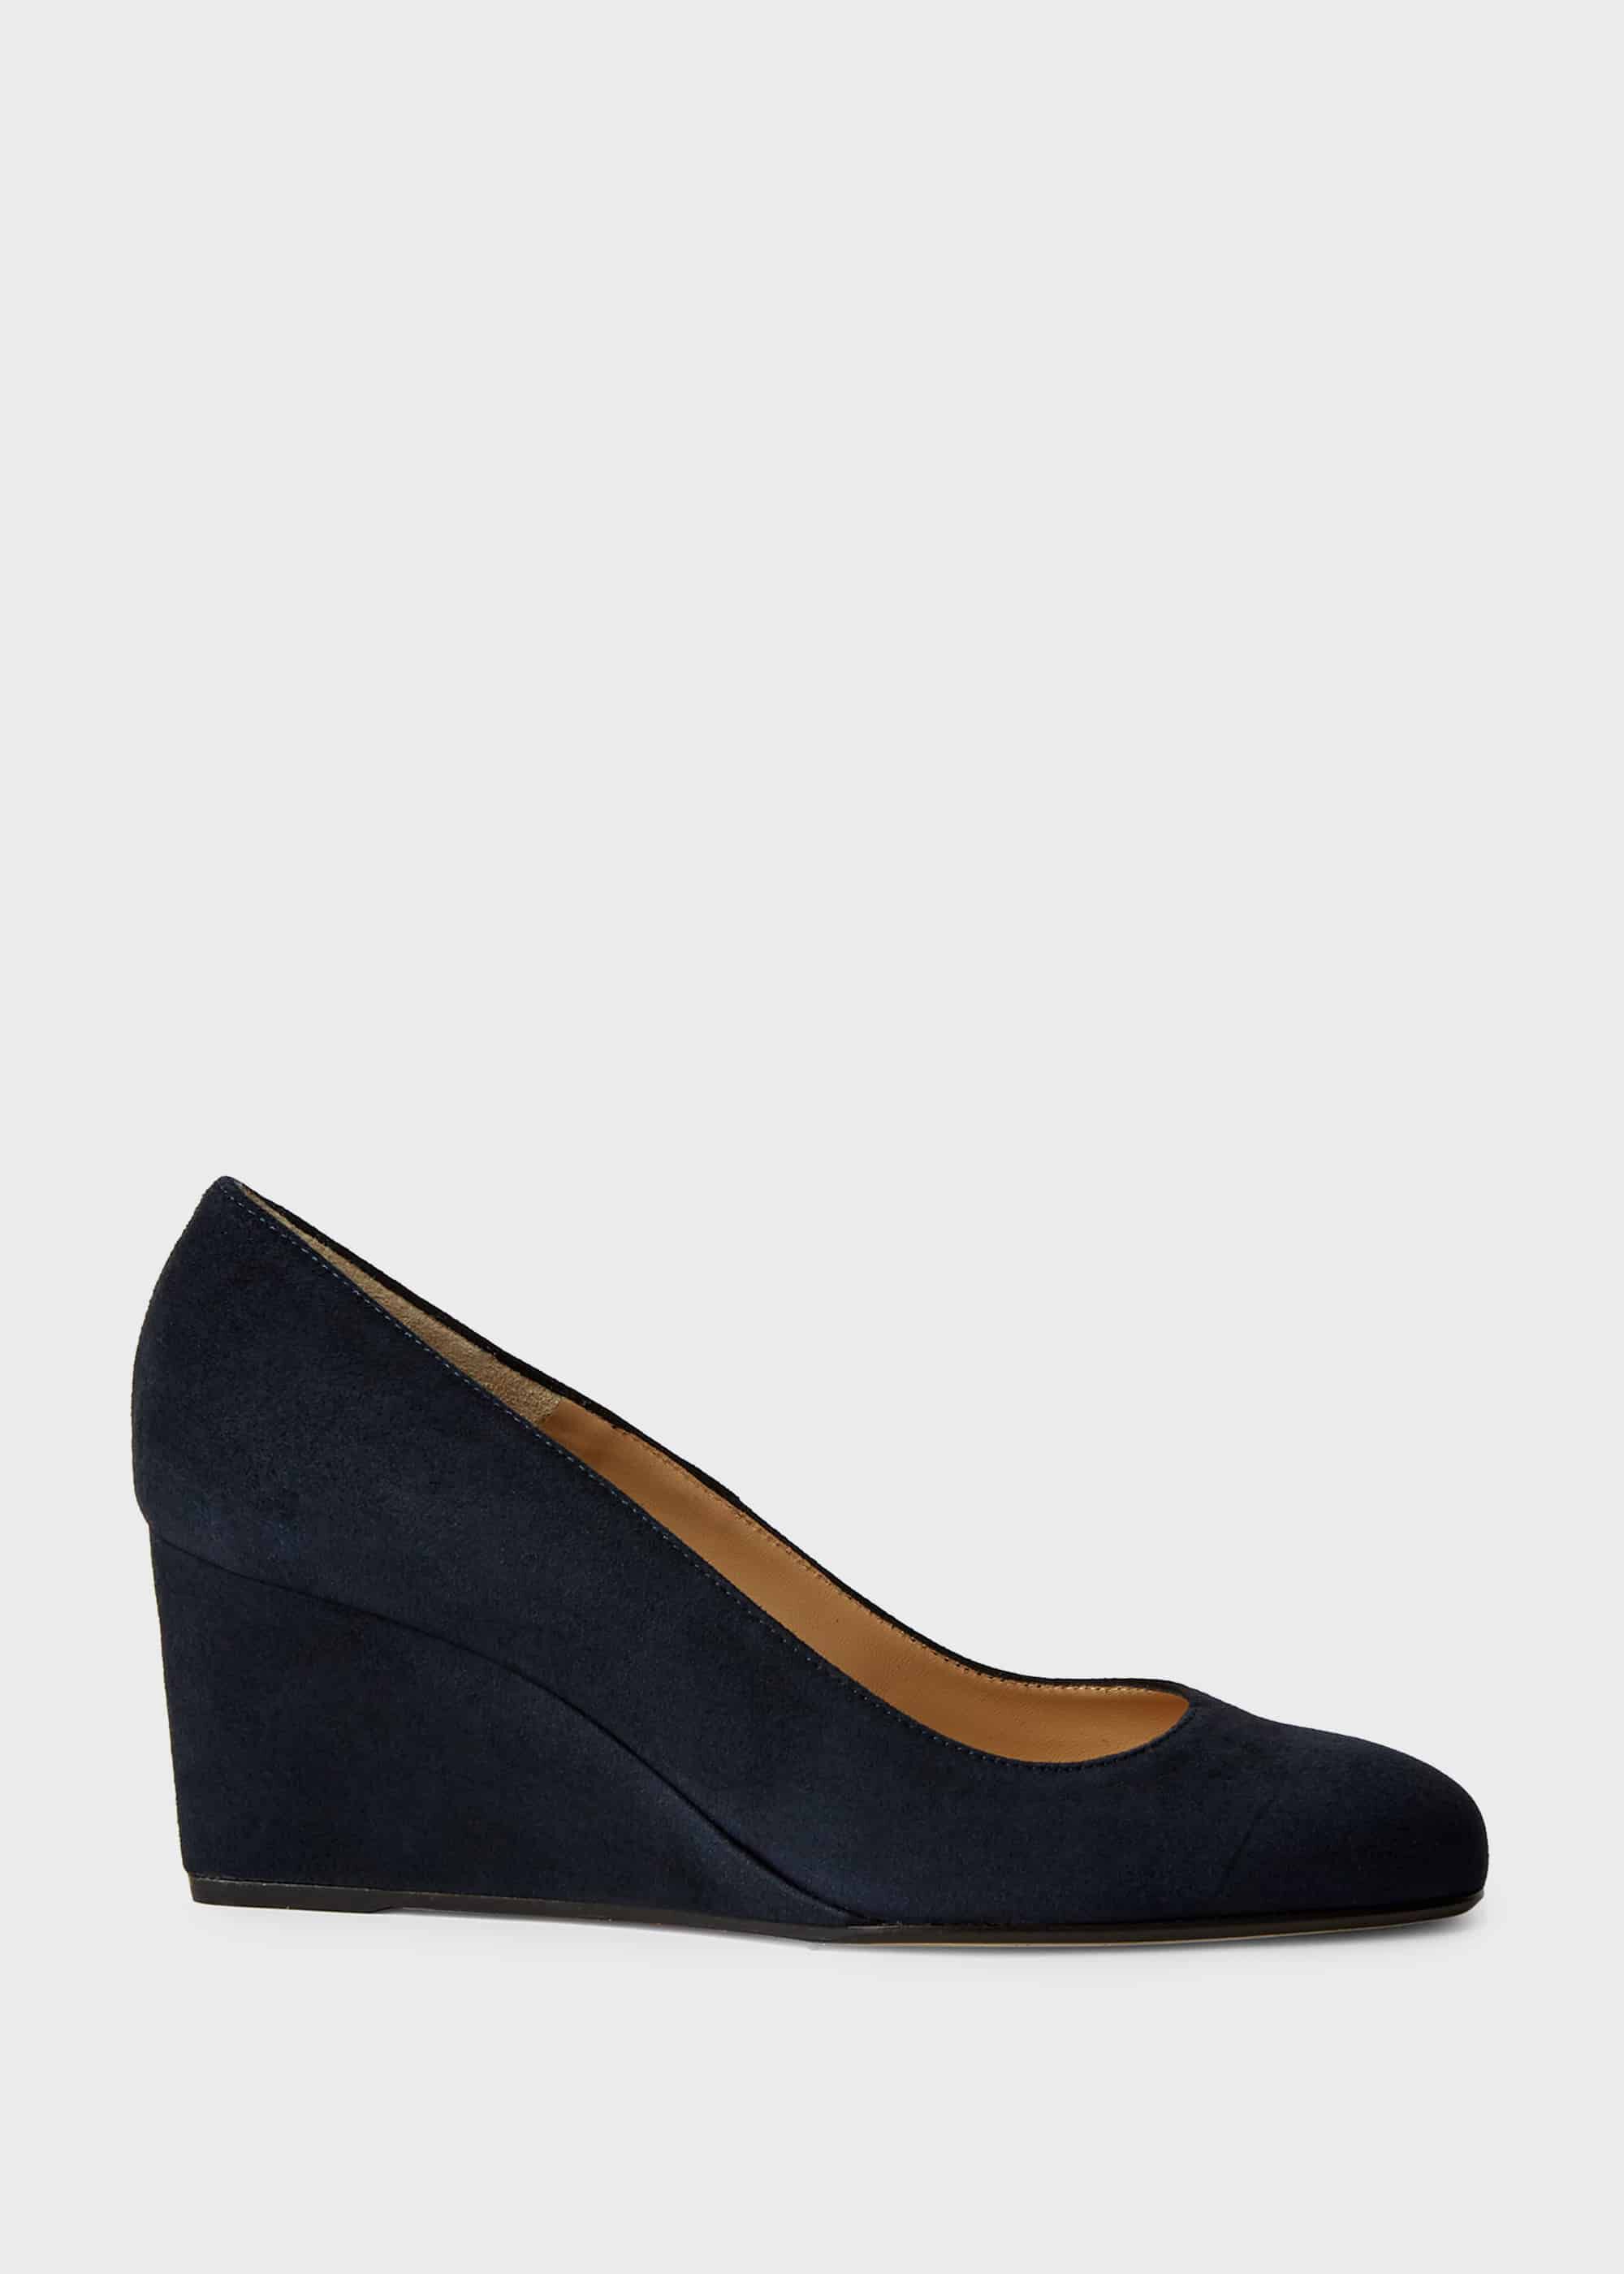 Emma Suede Wedge Court Shoes | Hobbs